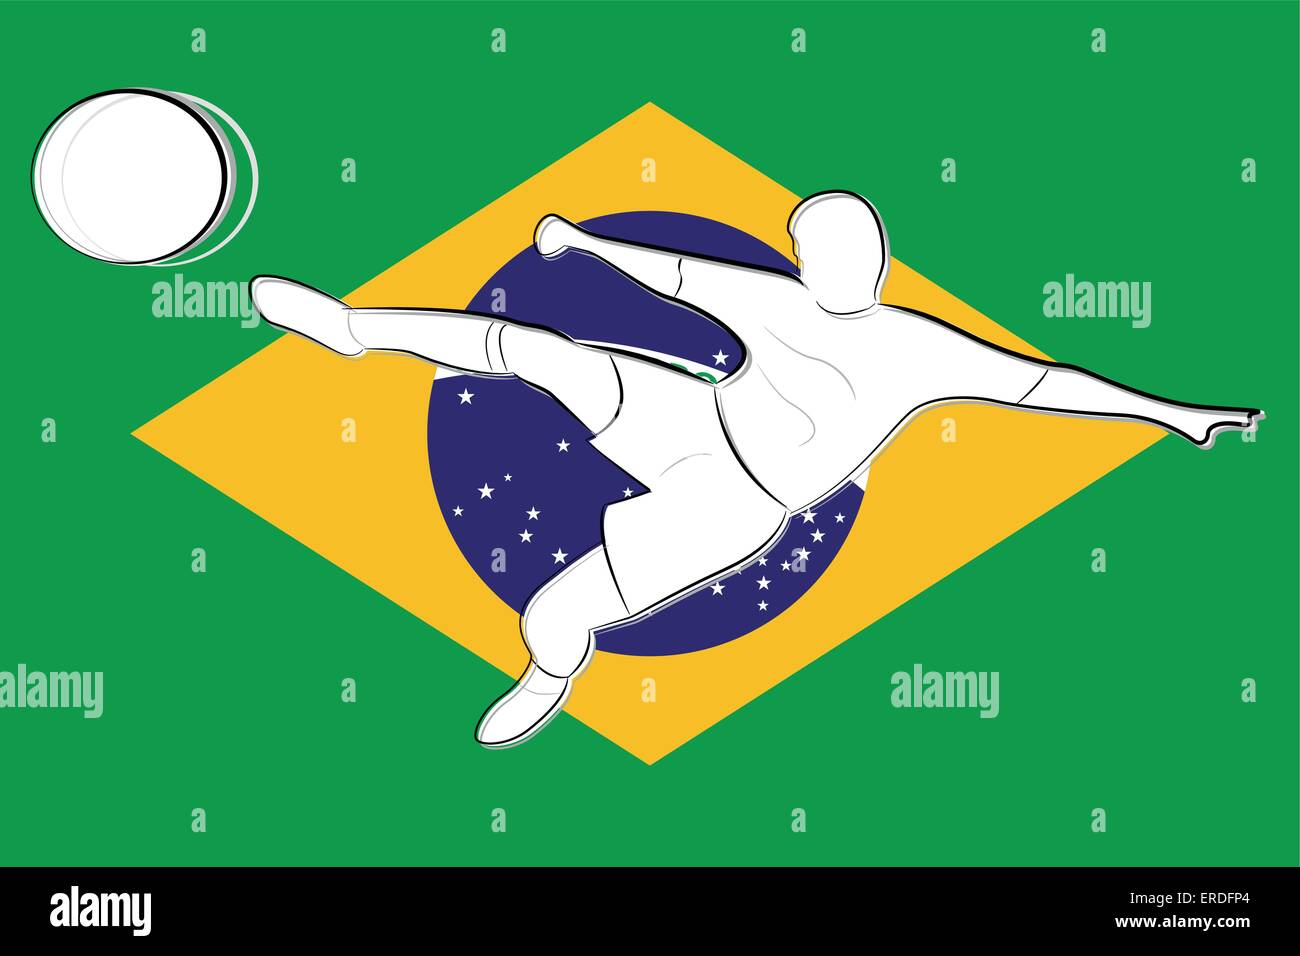 Vector illustration of brazil football cup background concept Stock Vector